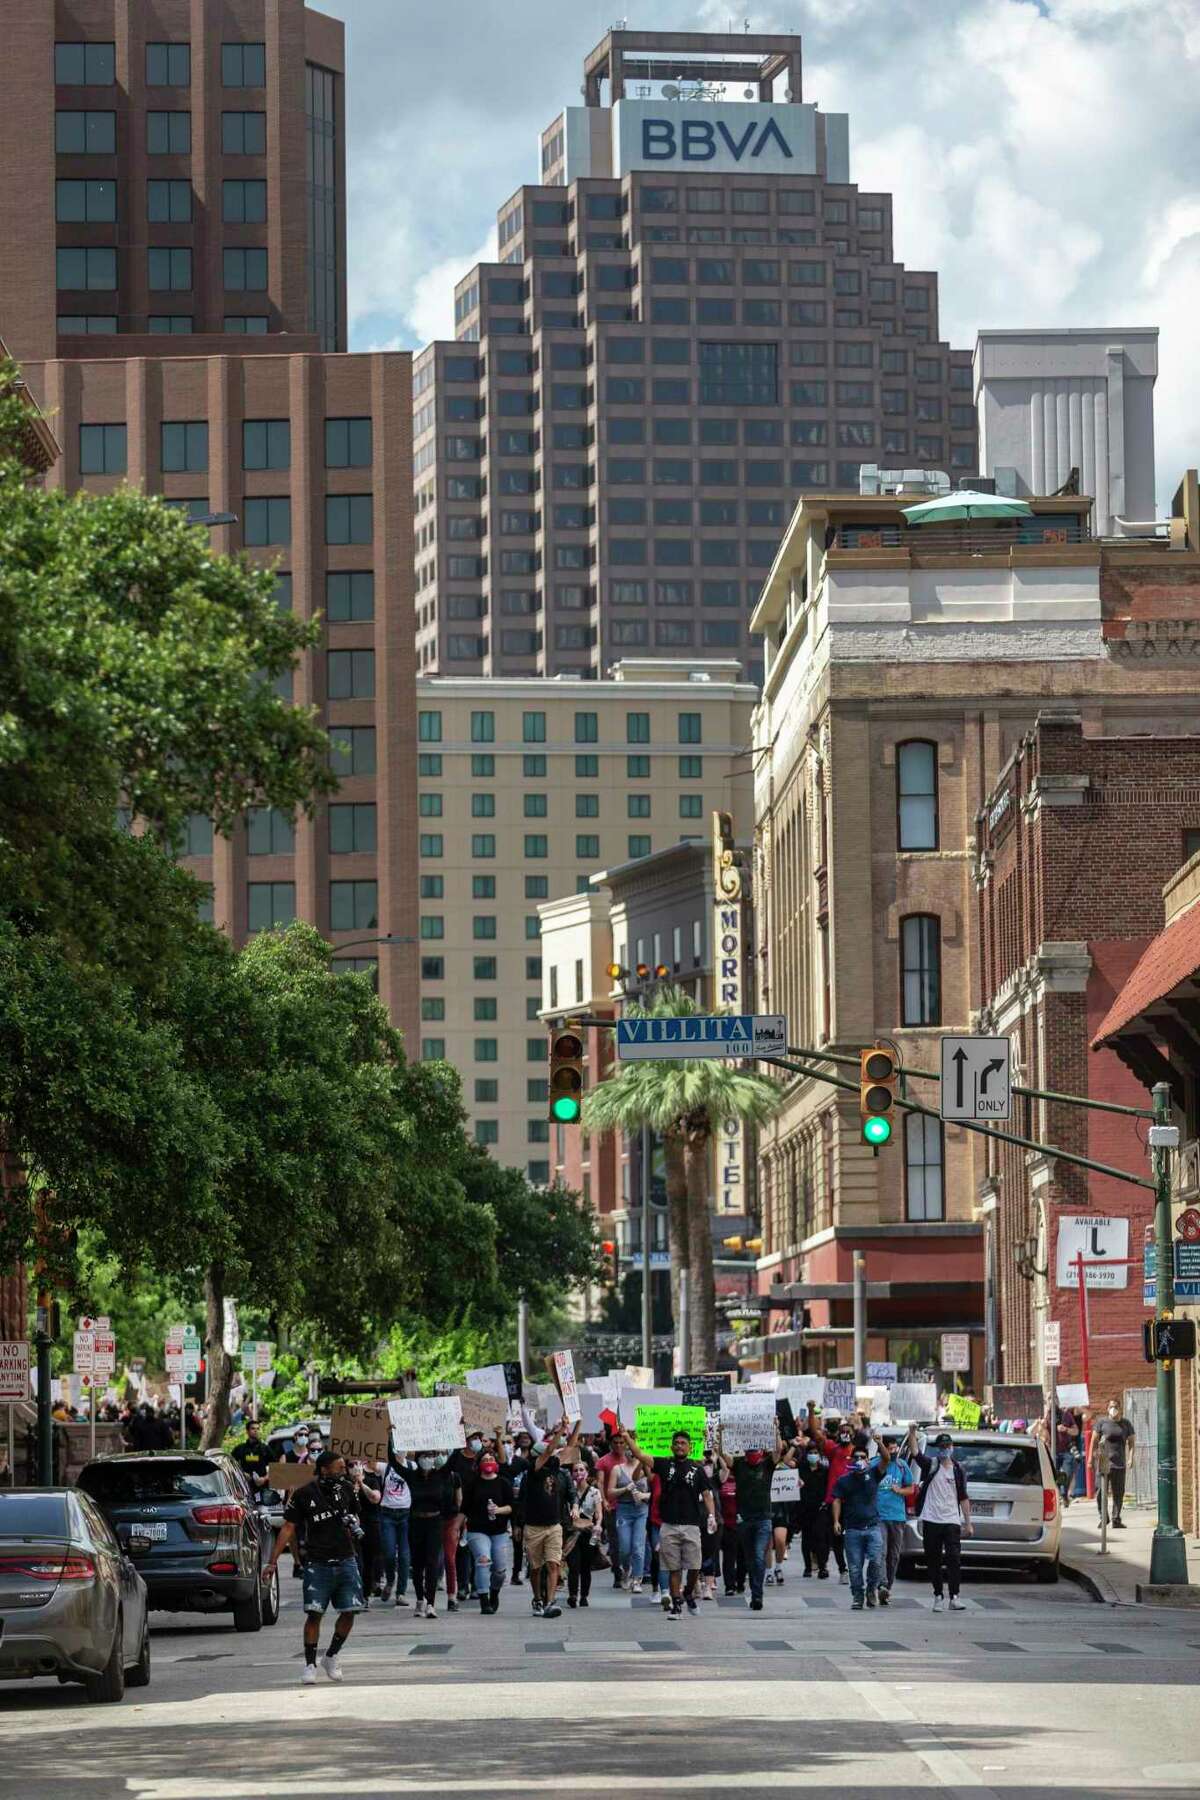 People protesting the death of George Floyd march Wednesday, June 3, 2020, around the county courthouse in downtown San Antonio. Floyd died in police custody May 25, 2020 in Minneapolis, Minnesota after a police officer was seen kneeling on his neck for more than 8 minutes. The death has sparked nationwide protests.